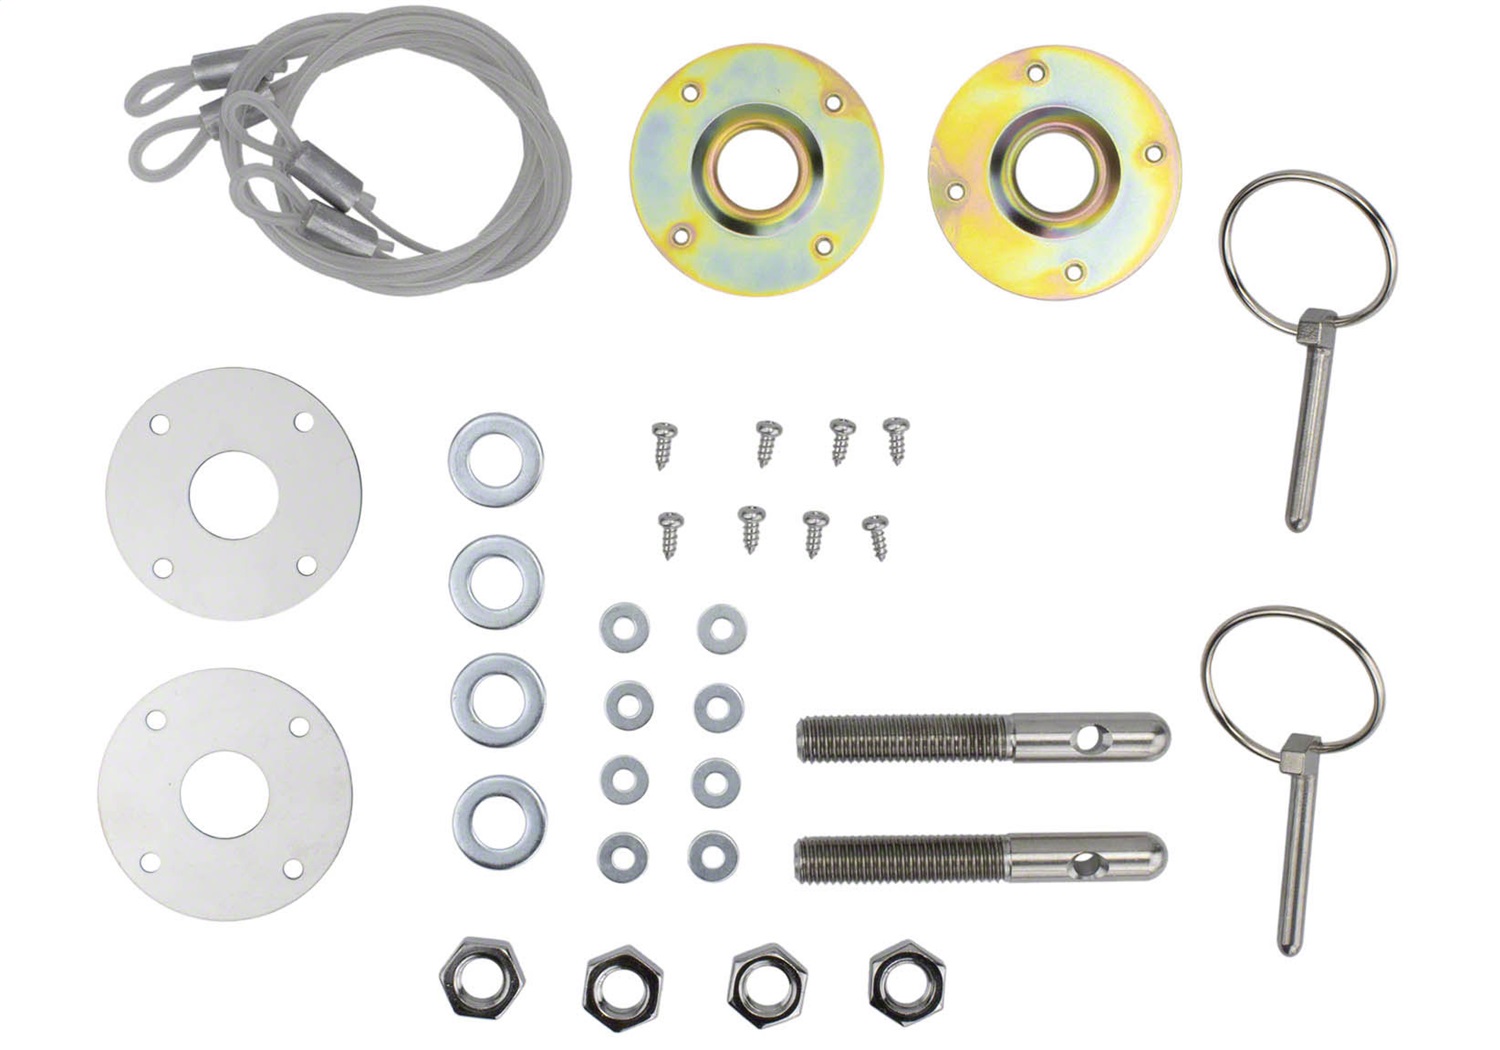 Ford Racing Ford Racing M-16700-A Hood Latch Kit